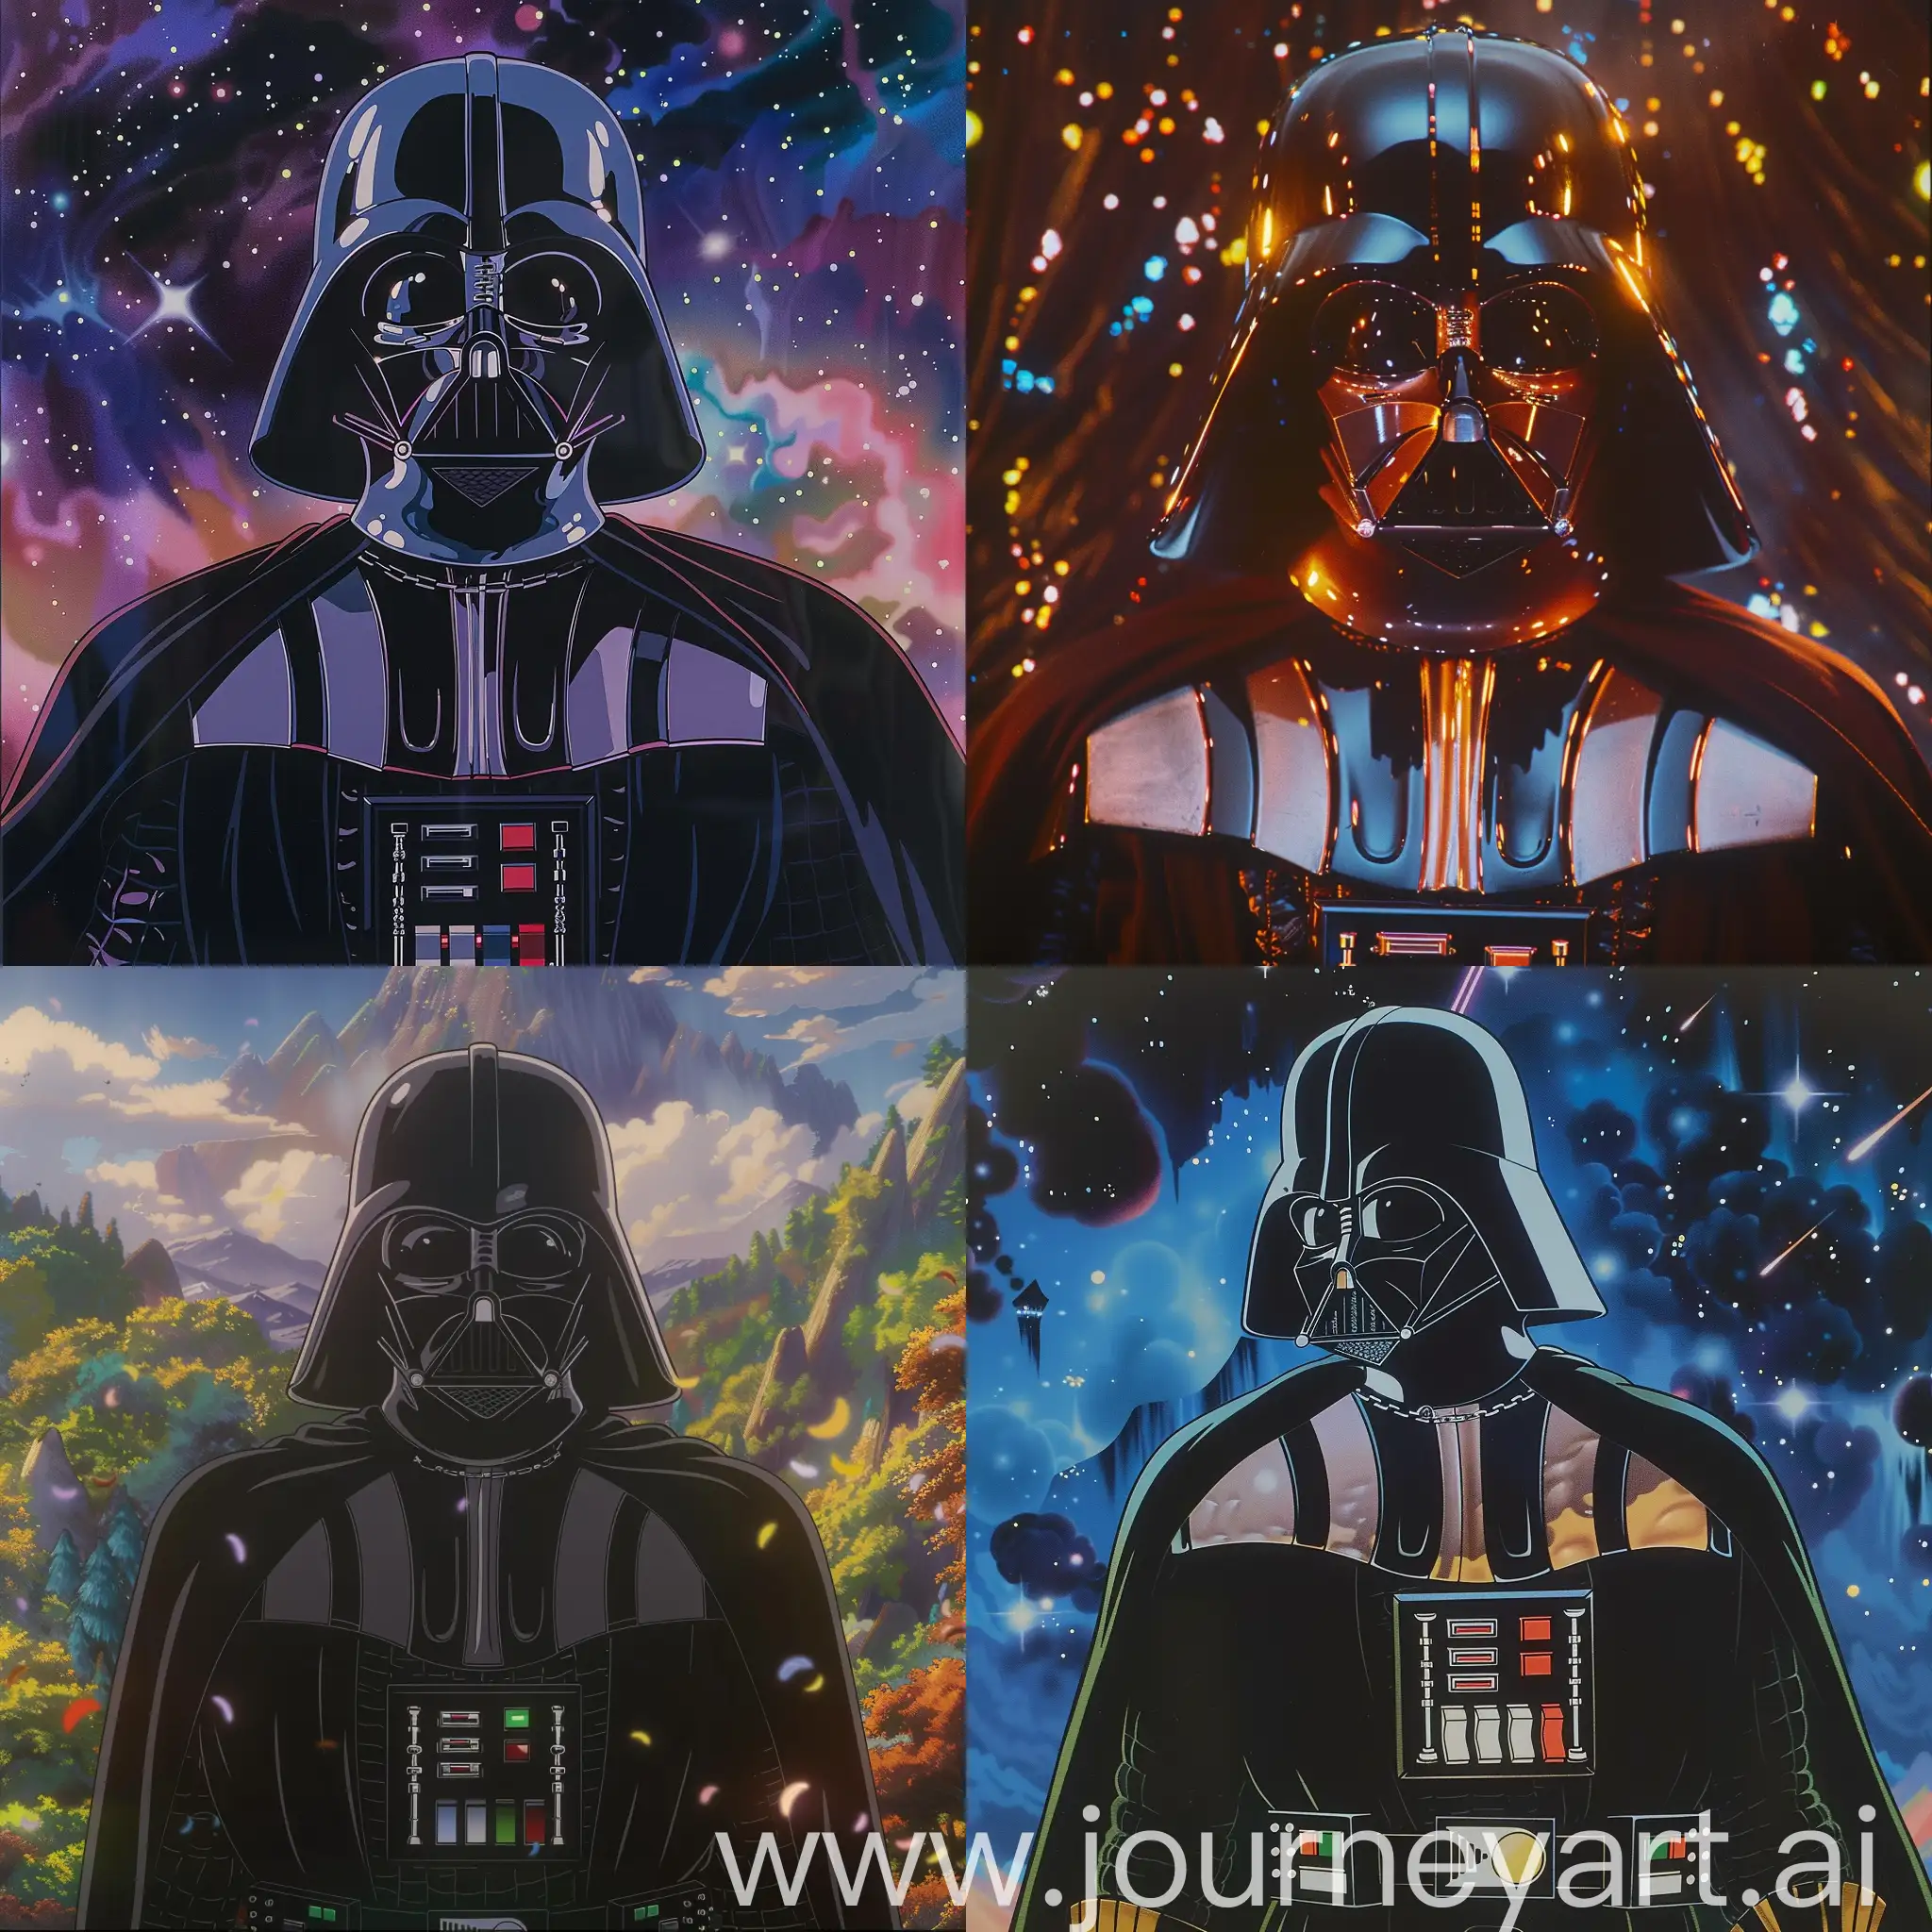 Darth Vader portrait in studio ghibli anime genre film, dvd screenshot from anime film, wearing infinity stones and dark hell costume and 80s studio ghibli film composition